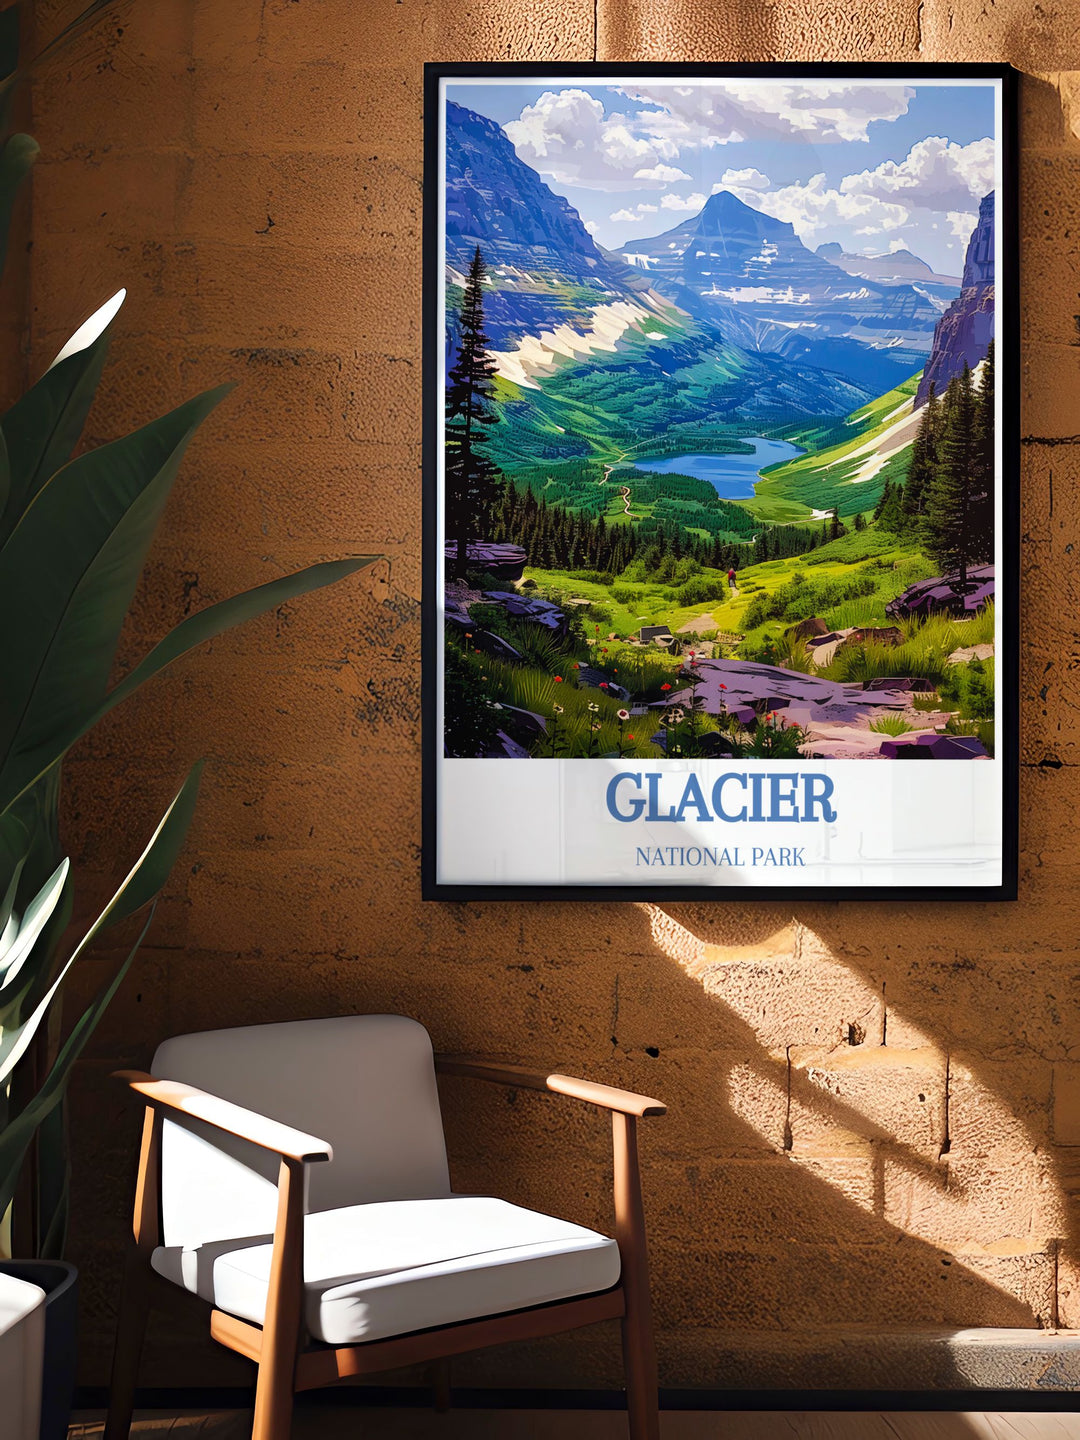 Showcasing the picturesque views of Logan Pass, this poster is perfect for anyone who loves serene landscapes and natural beauty. The detailed illustrations highlight the passs dramatic vistas and scenic surroundings, bringing a piece of Glacier National Parks tranquility into your home.